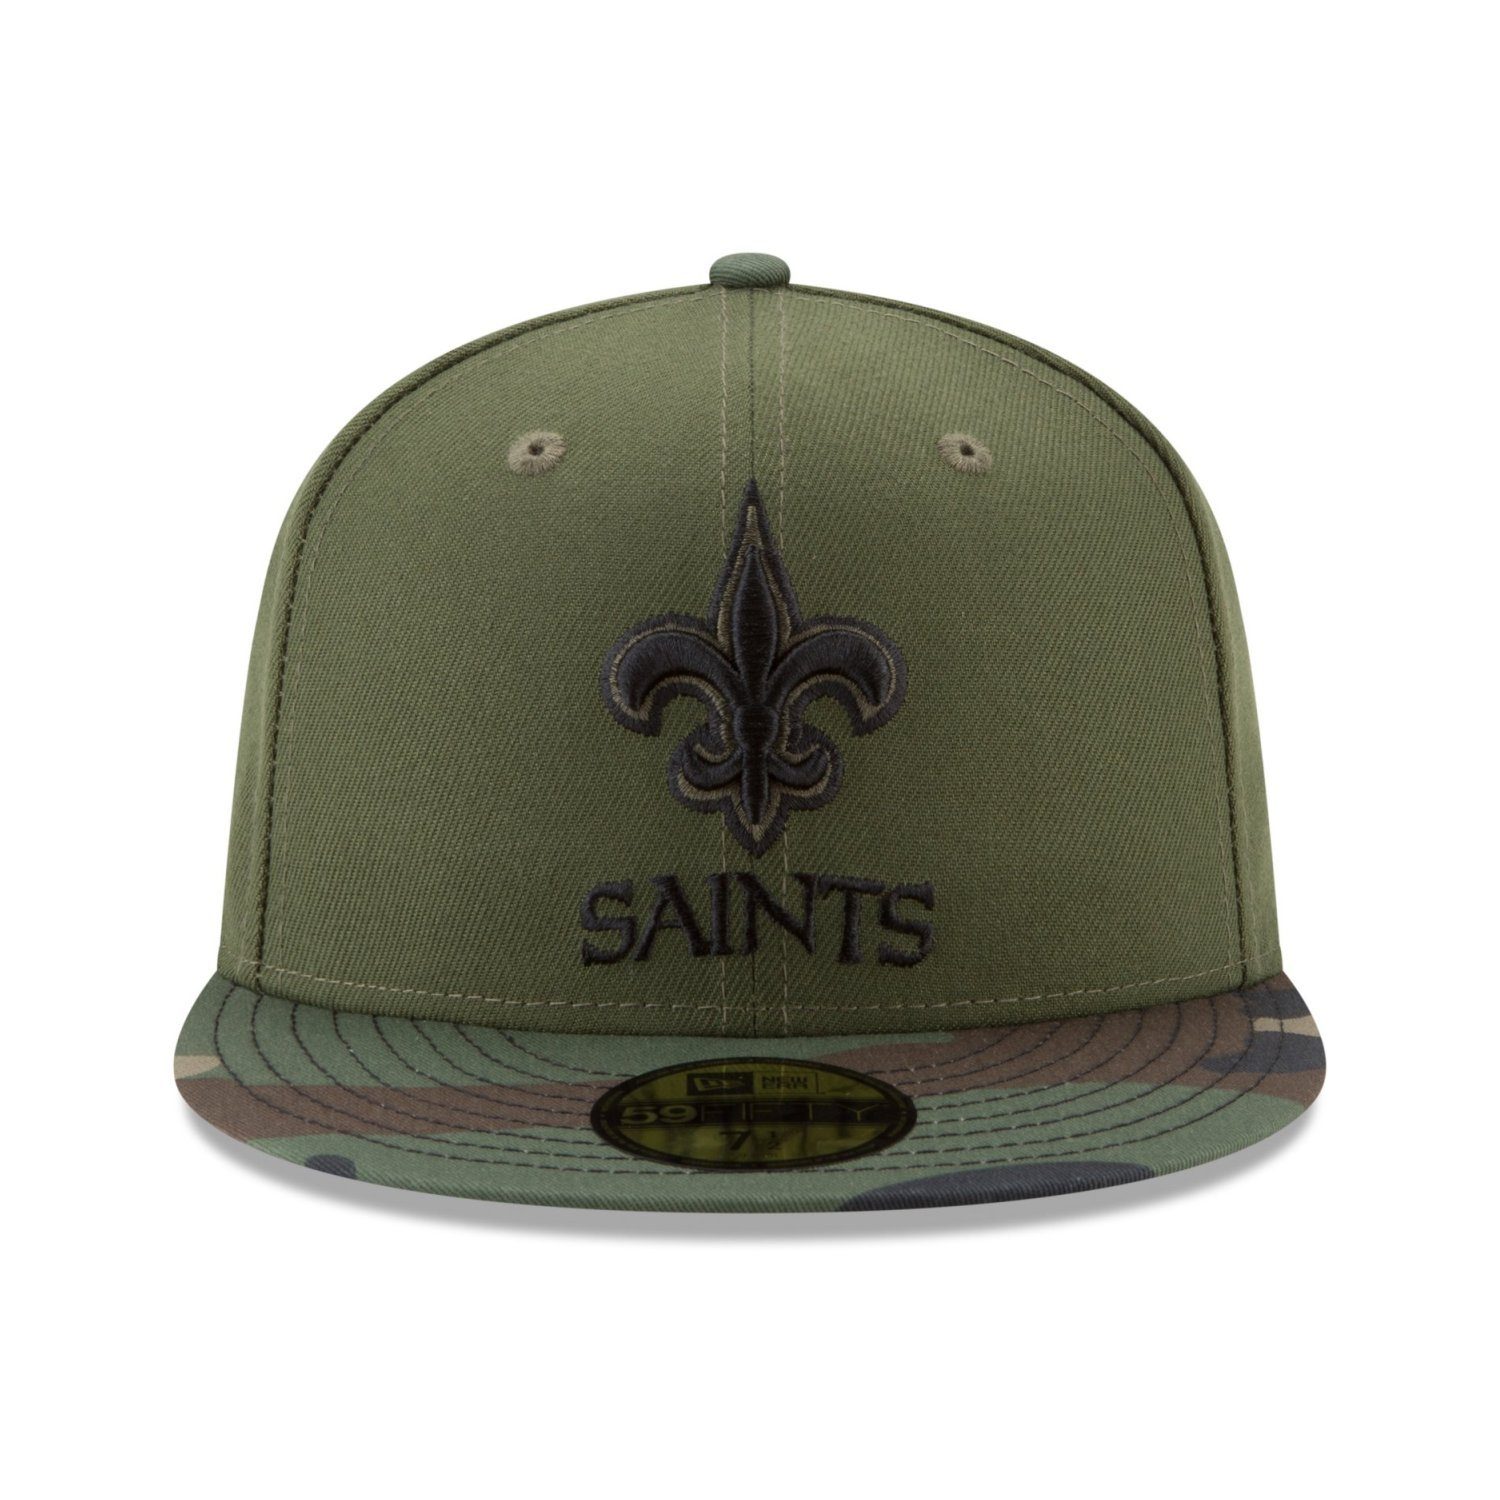 Orleans Era New New Fitted Cap 59Fifty Saints